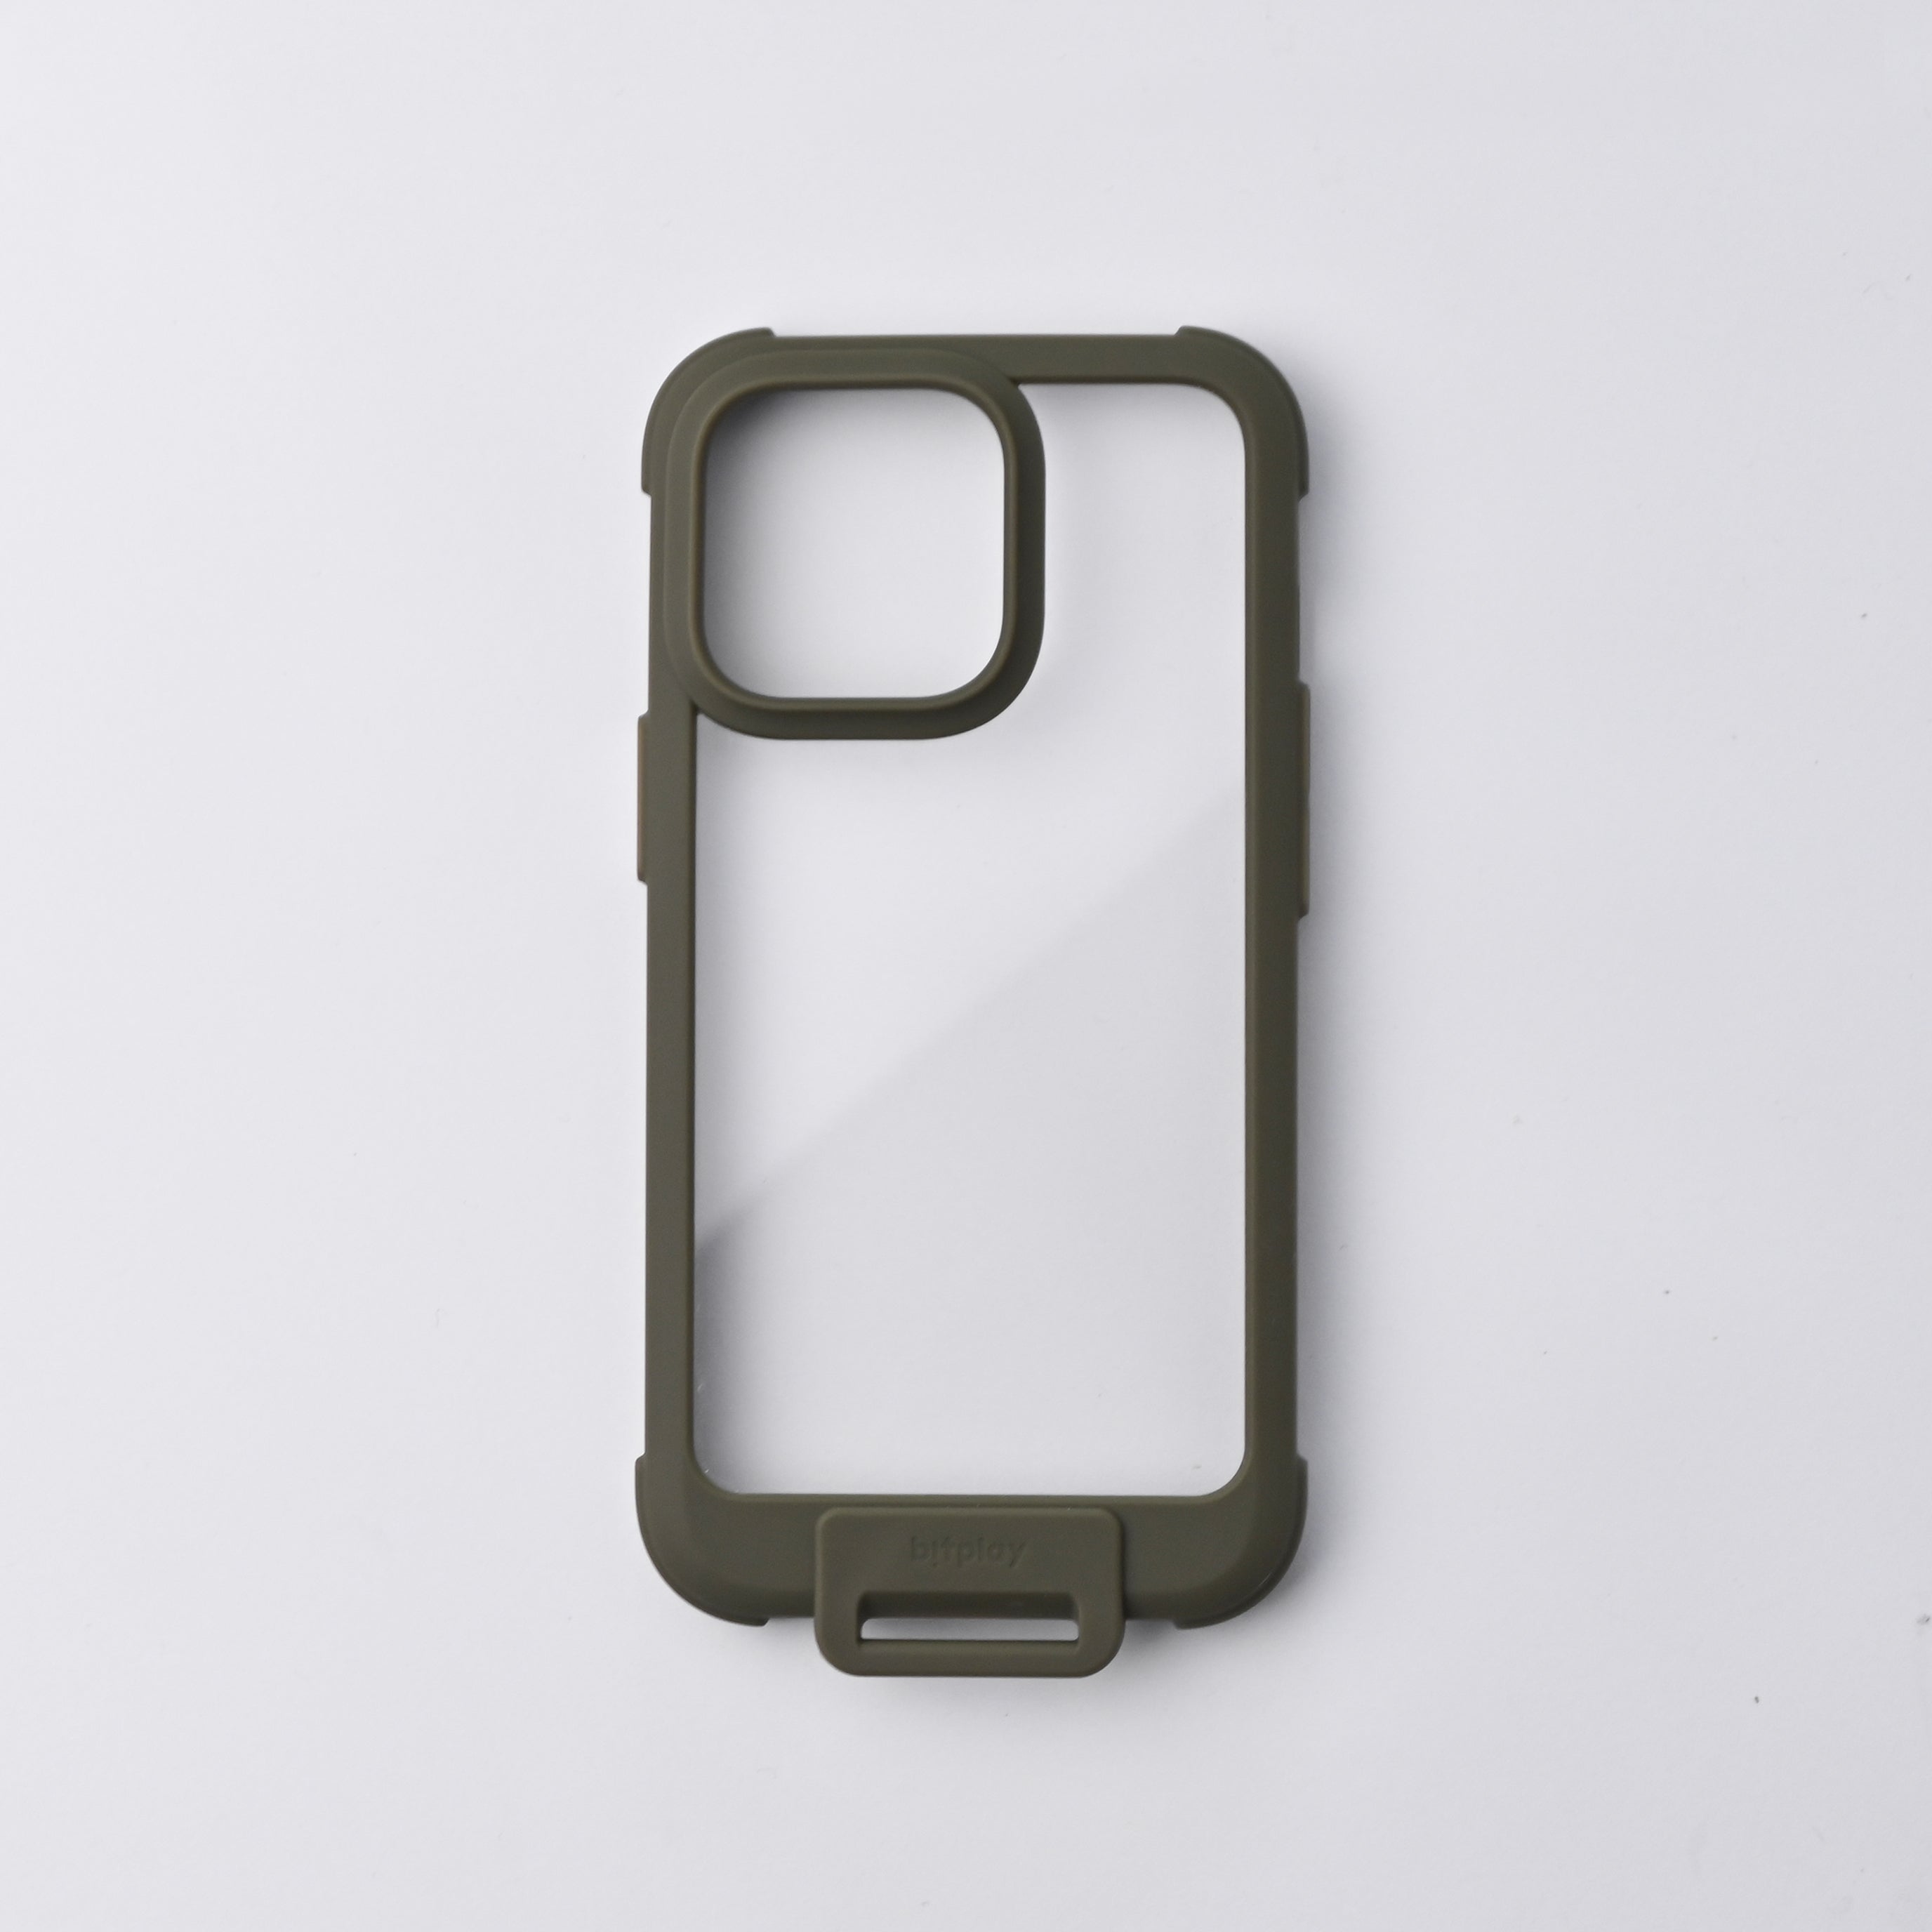 Wander Case for iPhone 13 Series - Khaki Green (Sticker Set 02 Outdoor Included）